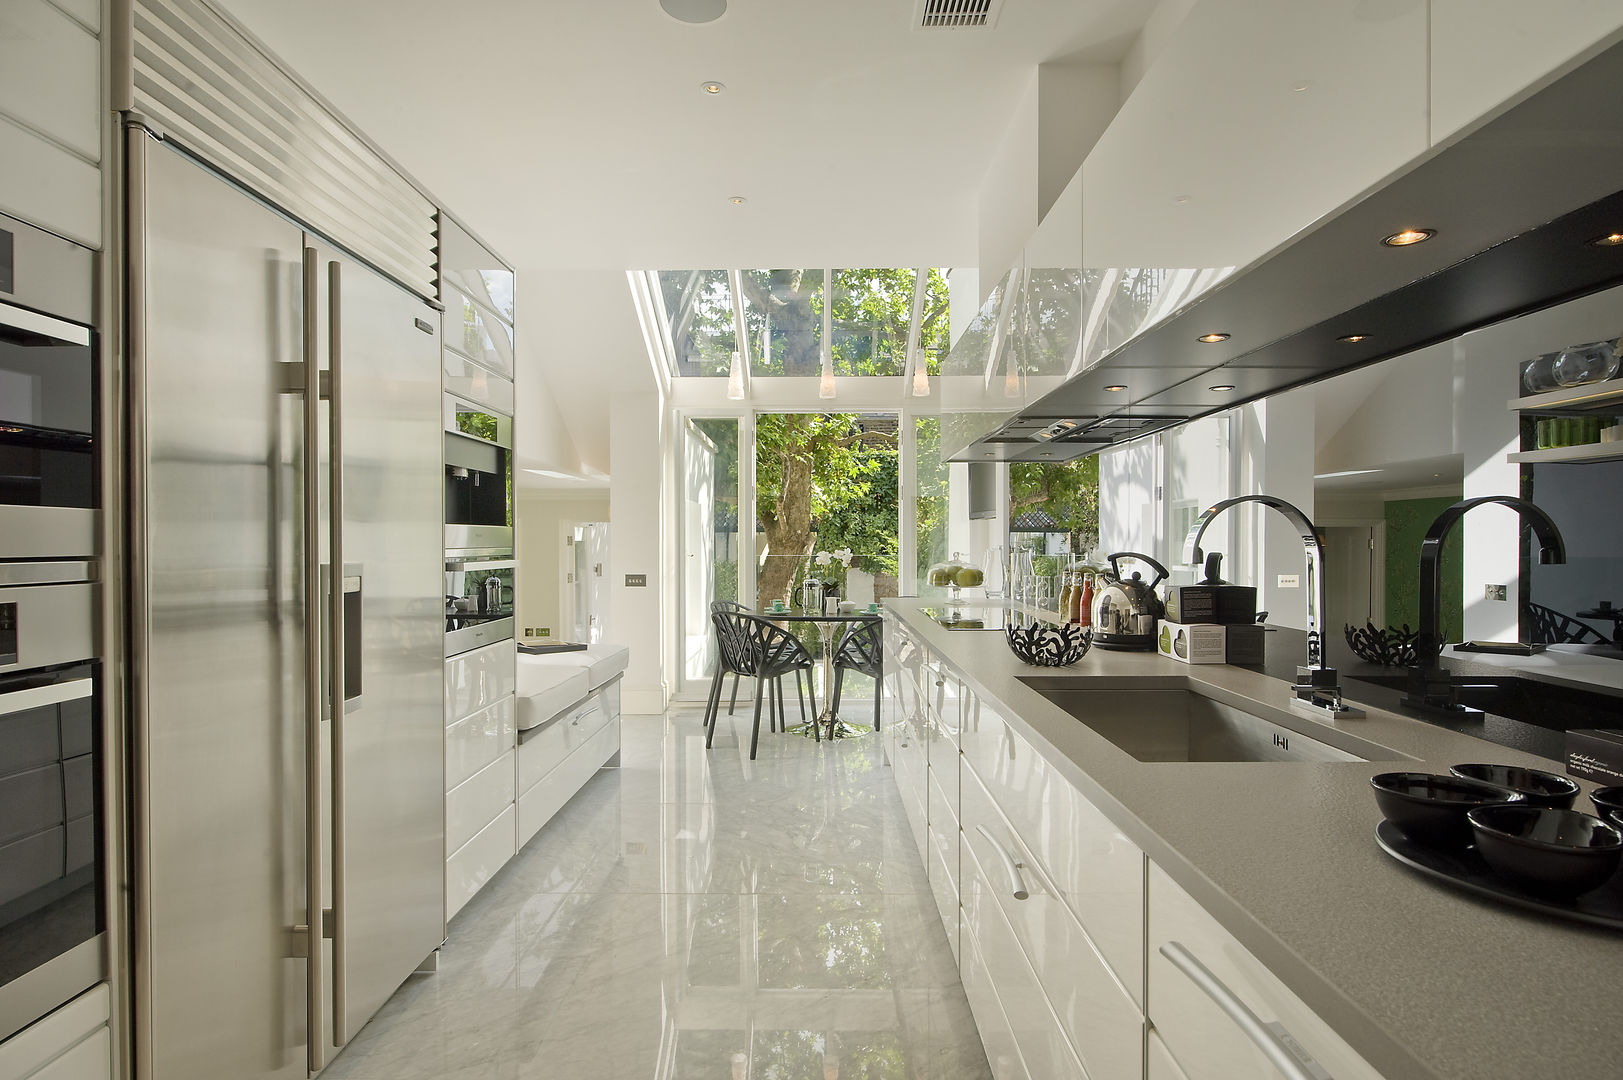 The Kitchen at the Chester Street House Nash Baker Architects Ltd Cozinhas clássicas